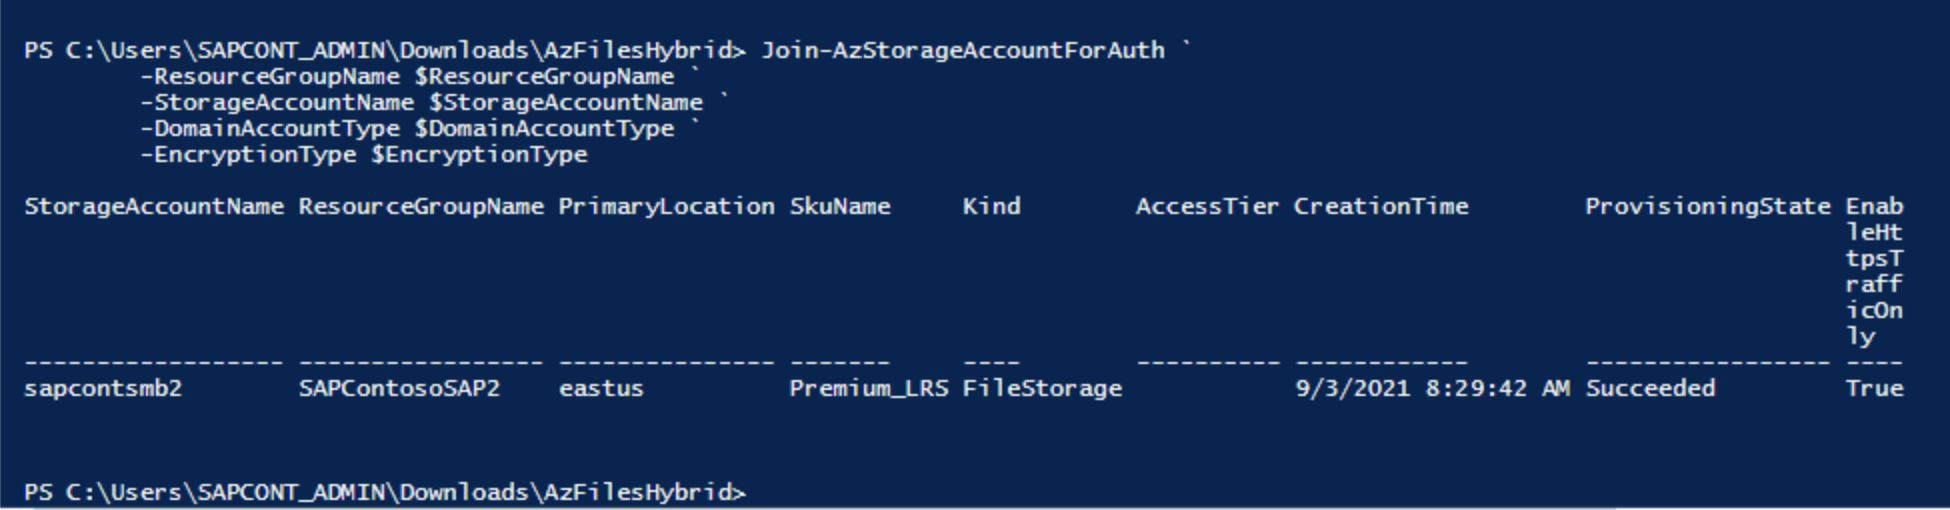 Screenshot of the PowerShell script that creates a local Active Directory account.